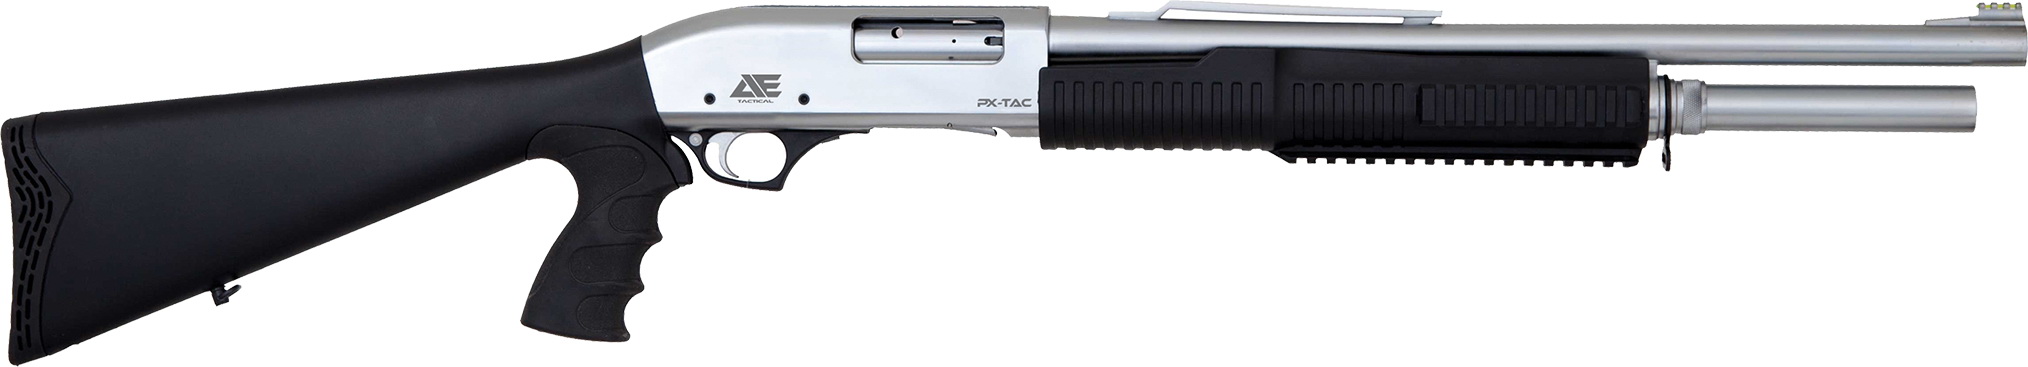 AE TACTICAL PX TAC 107